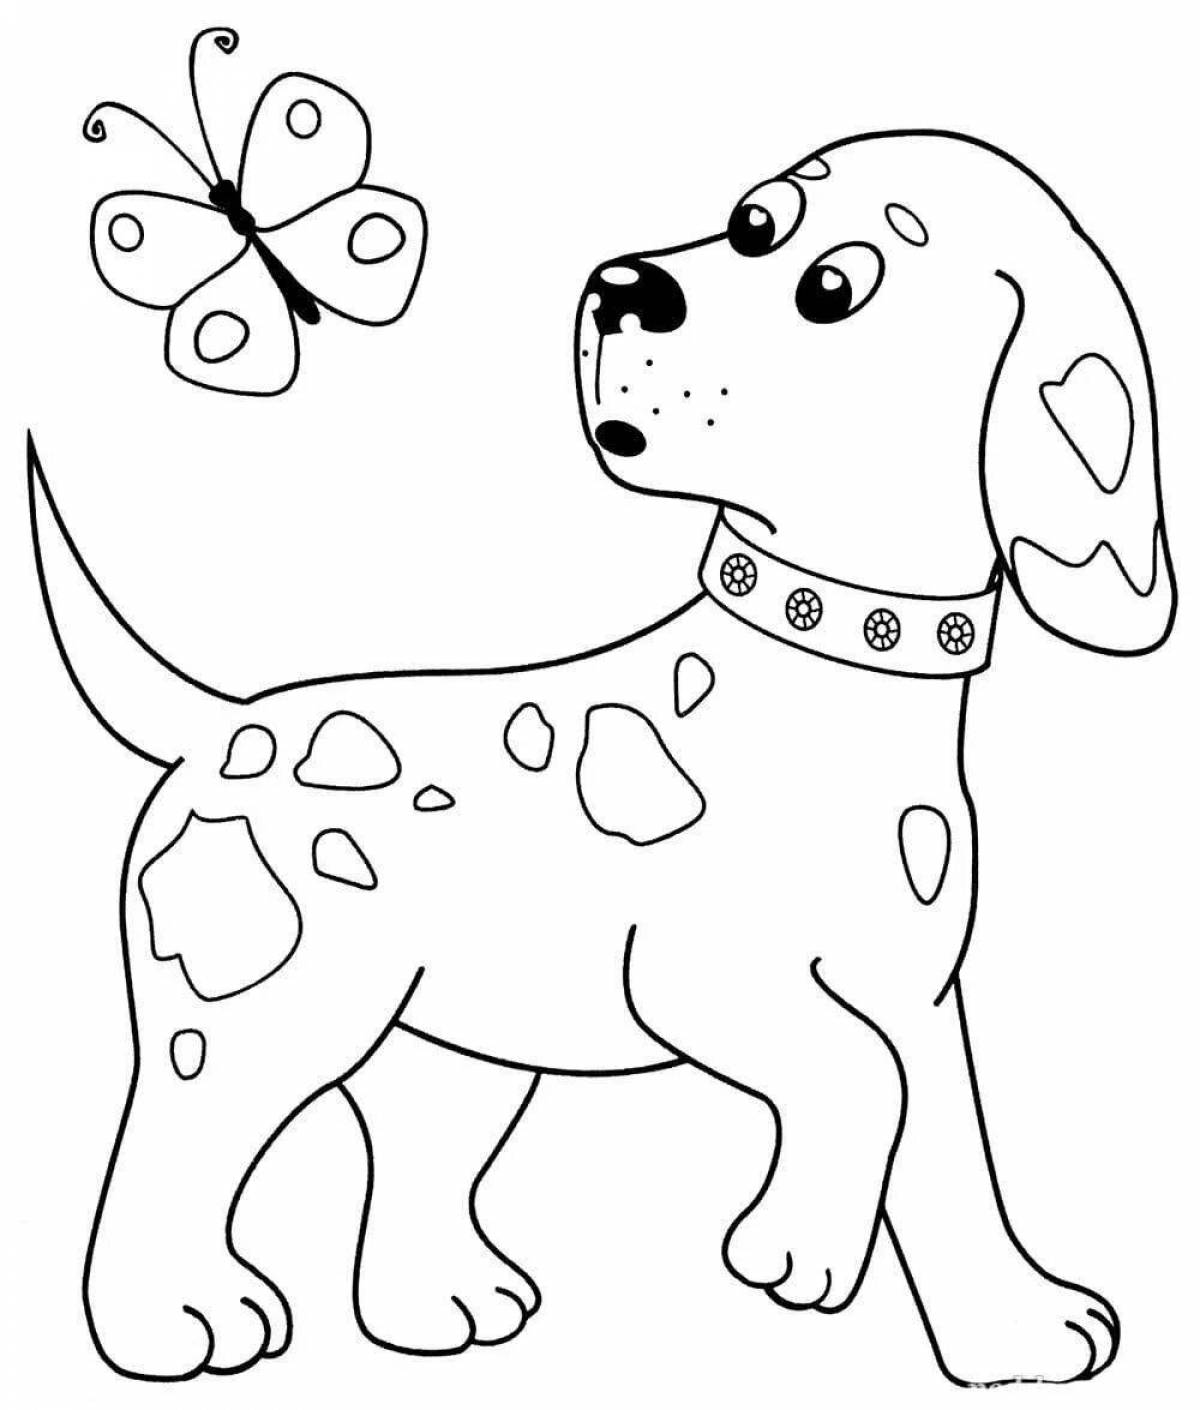 Magic drawing of a dog for children